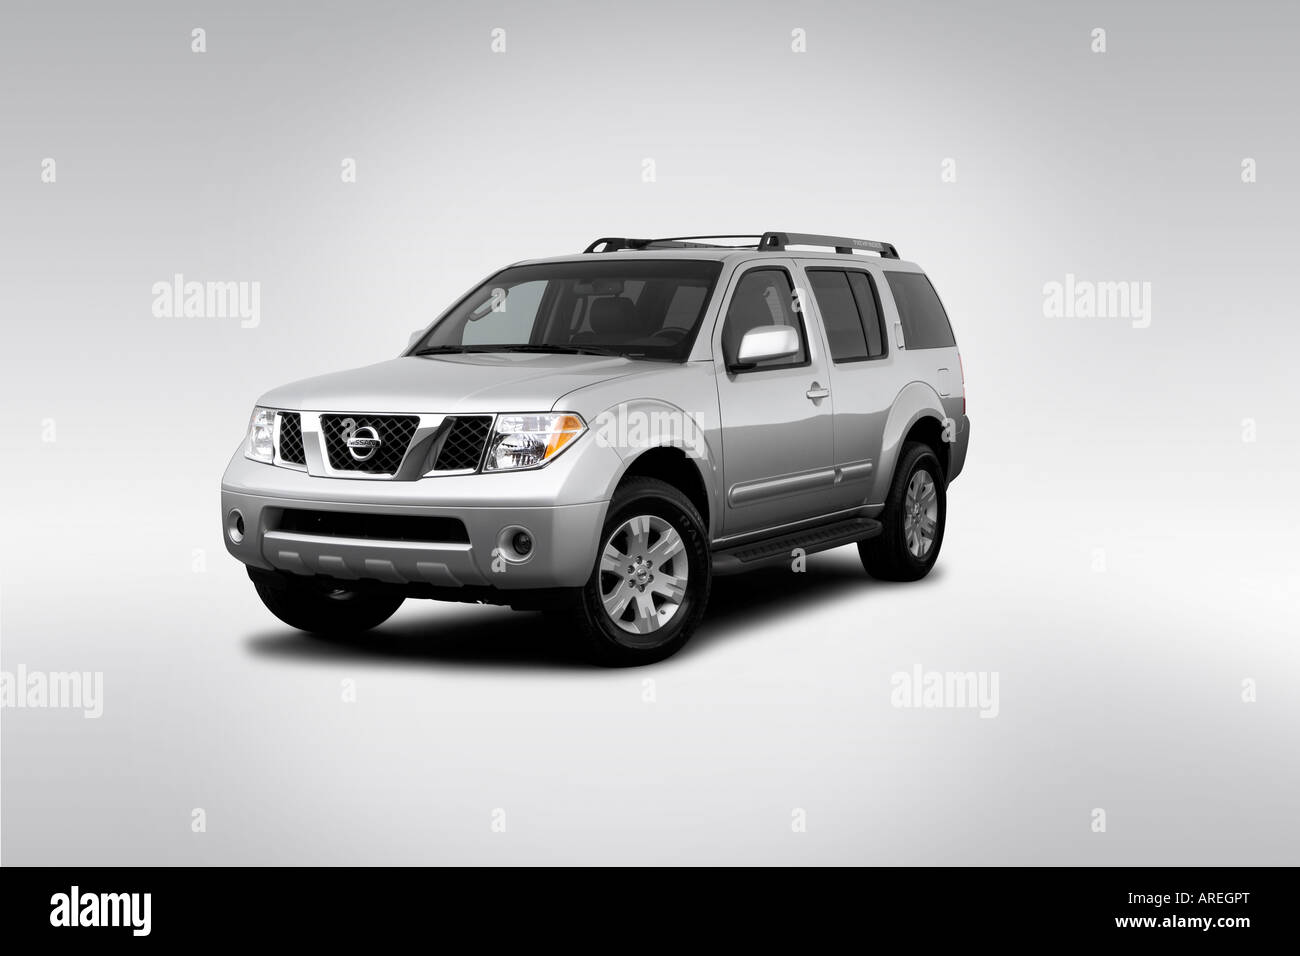 2006 Nissan Pathfinder LE in Silver - Front angle view Stock Photo